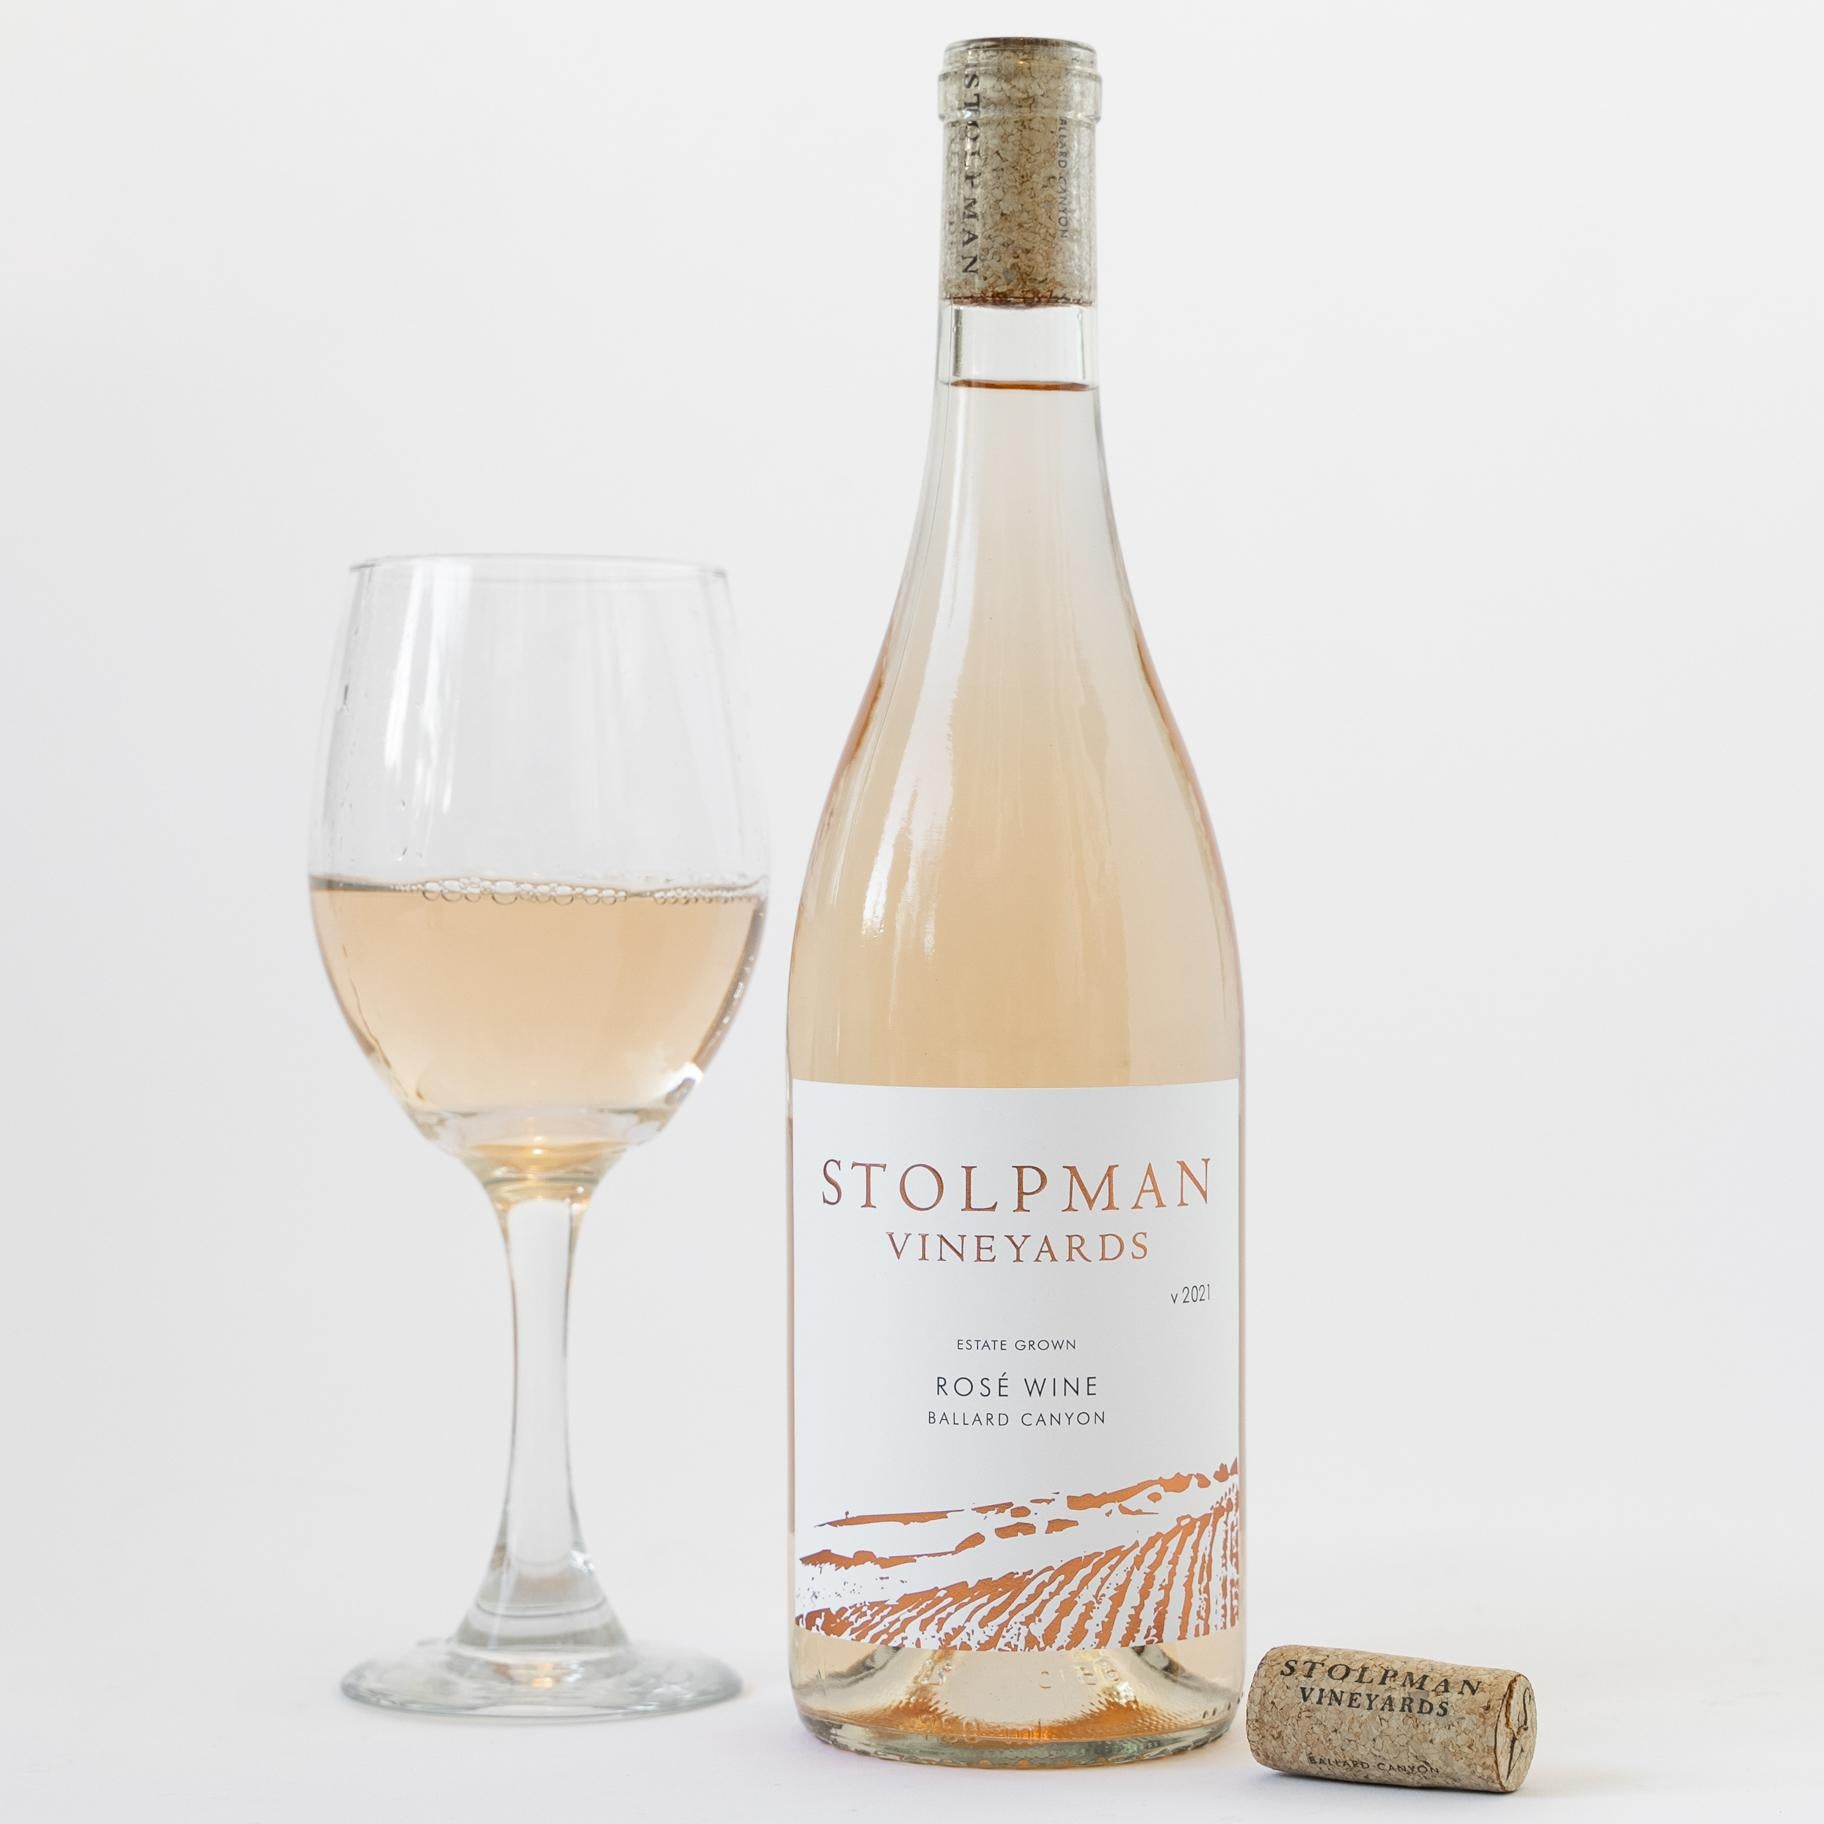 A bottle of Stolpman's estate Rosé next to a full wine glass on a white background